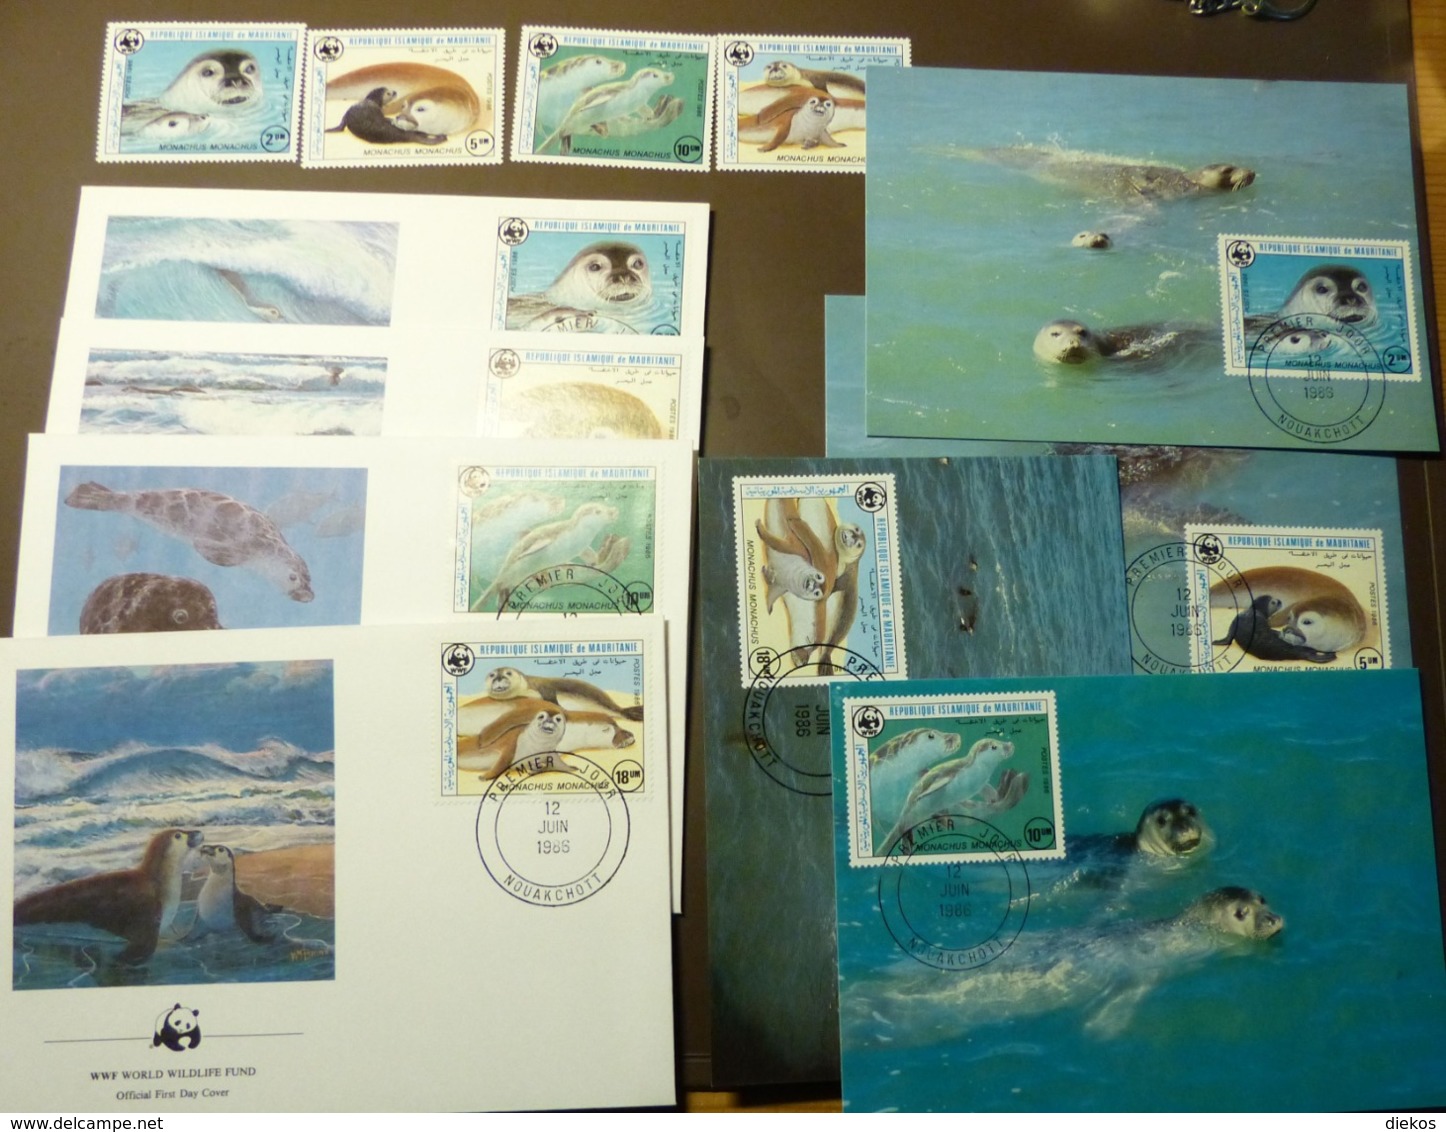 Mauritanie 1986 WWF Mittelmeer-Mönchsrobbe  Phoques  Michel 871-874  Maxi Card FDC MNH ** #cover 4985 - Collections, Lots & Séries